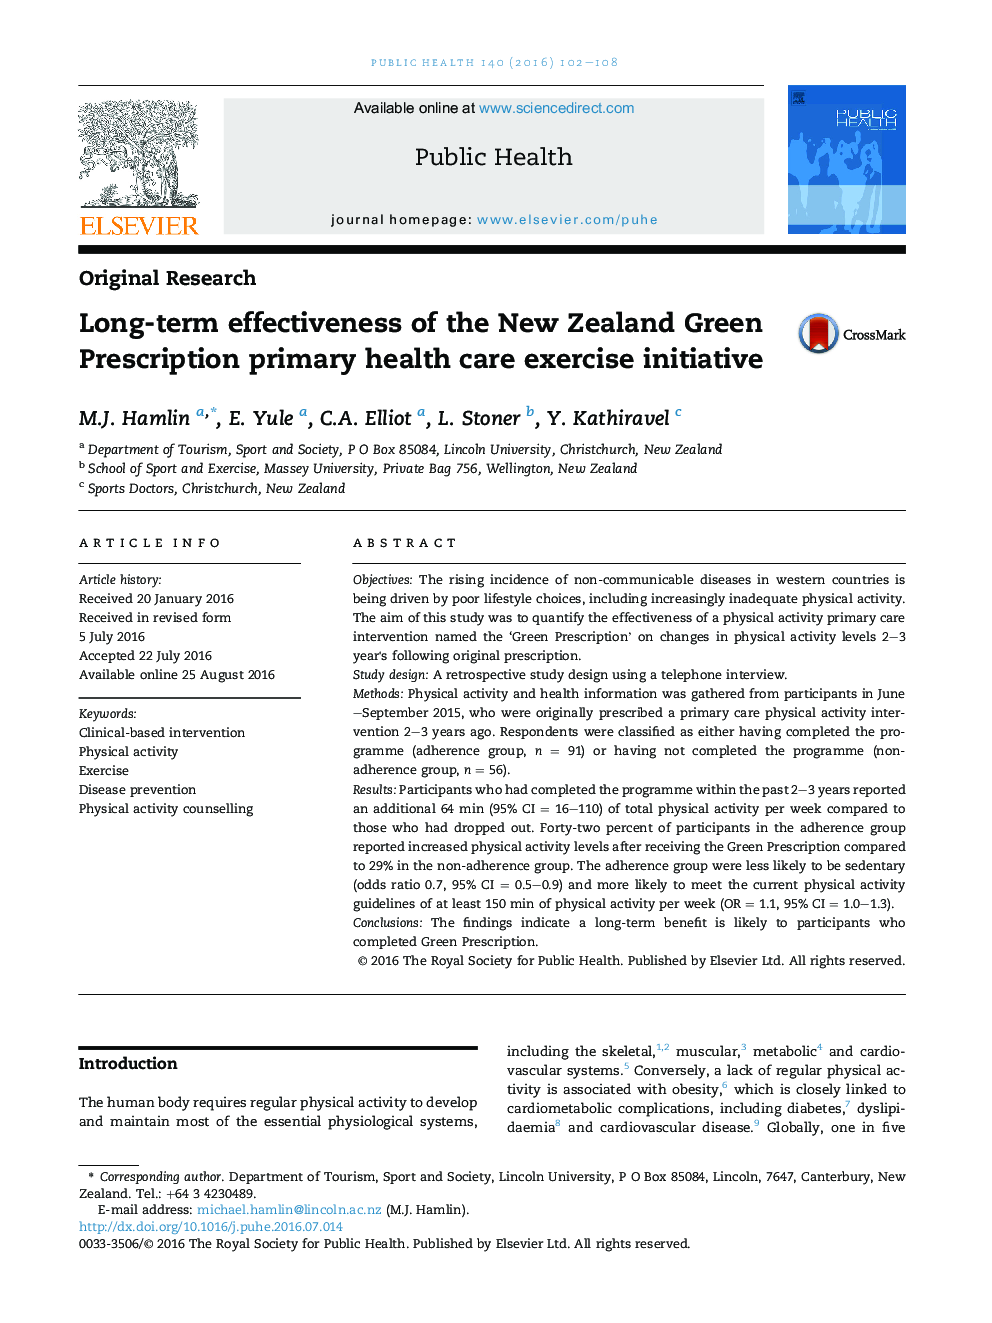 Long-term effectiveness of the New Zealand Green Prescription primary health care exercise initiative